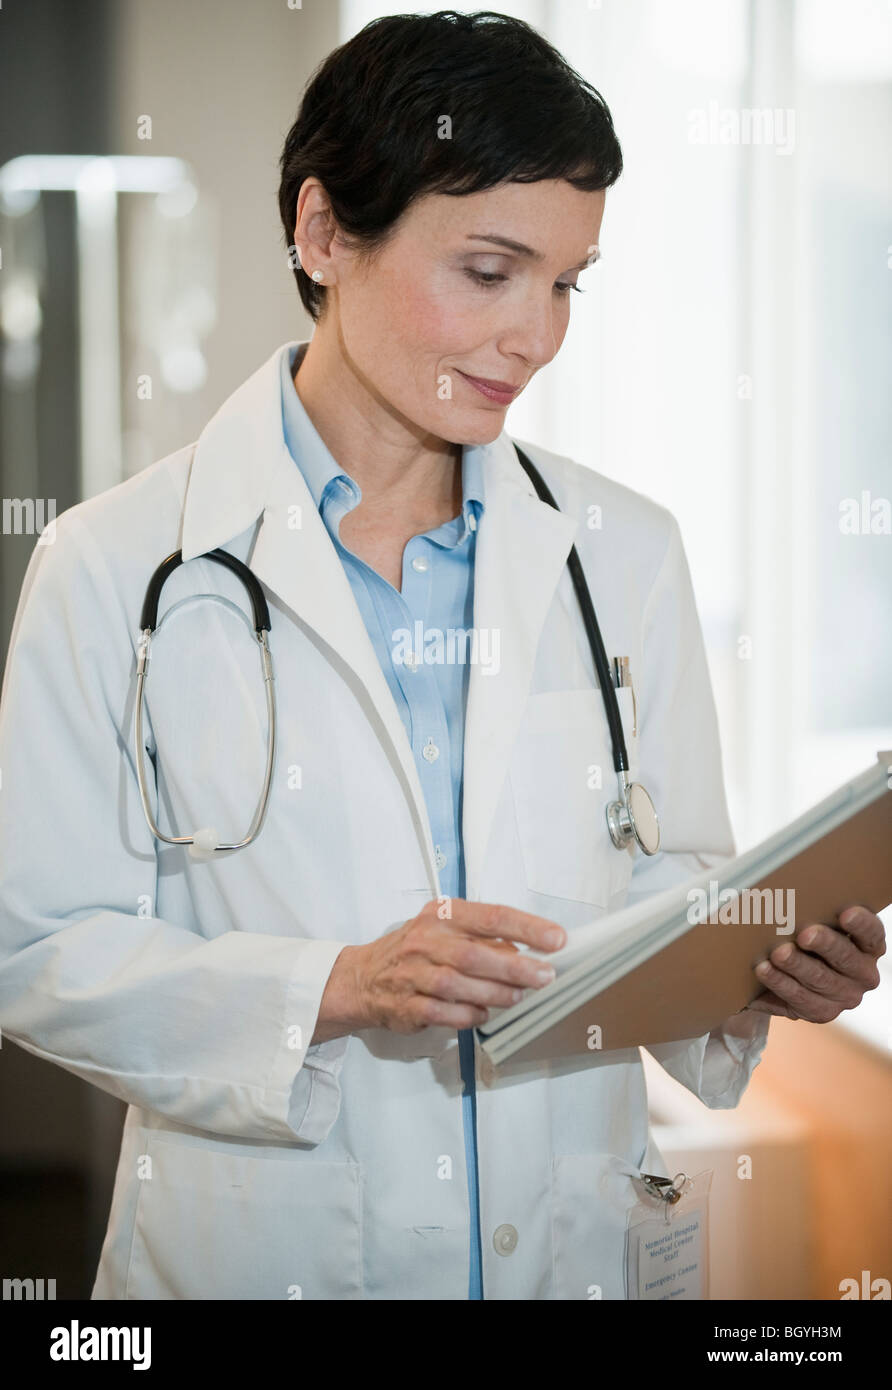 Doctor looking at chart Stock Photo